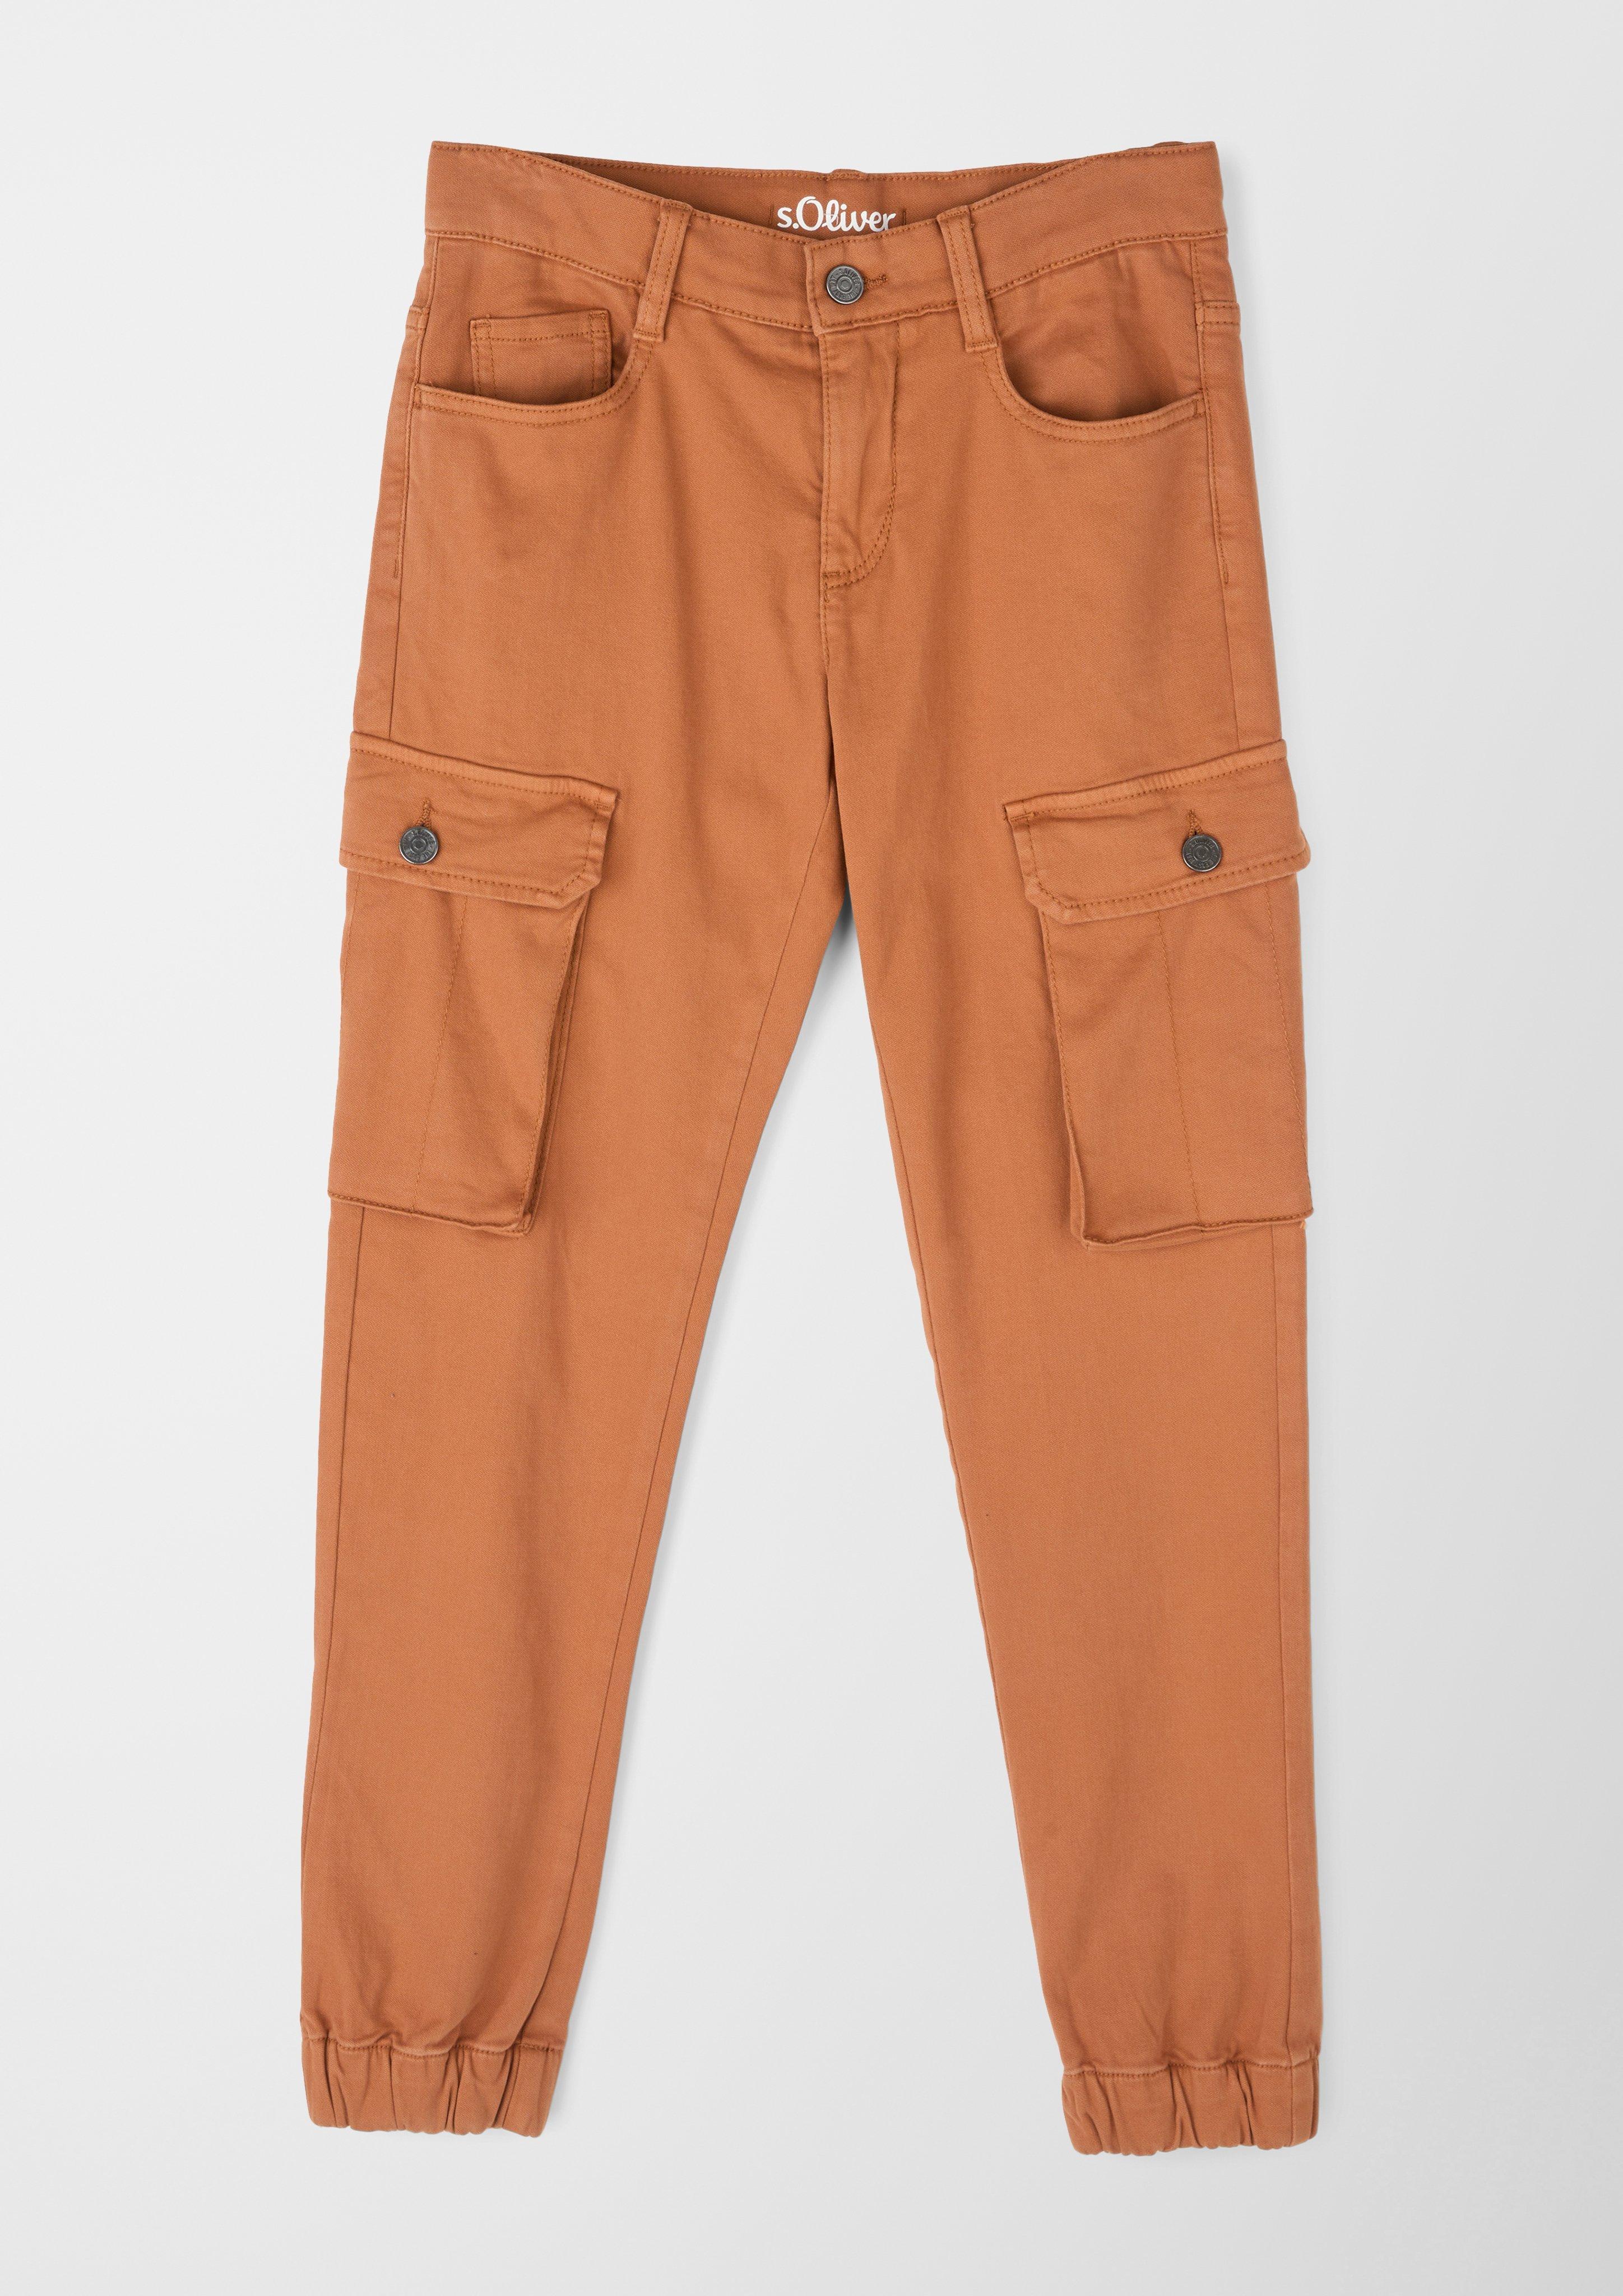 Slim cinnamon cargo pockets fit: trousers - with